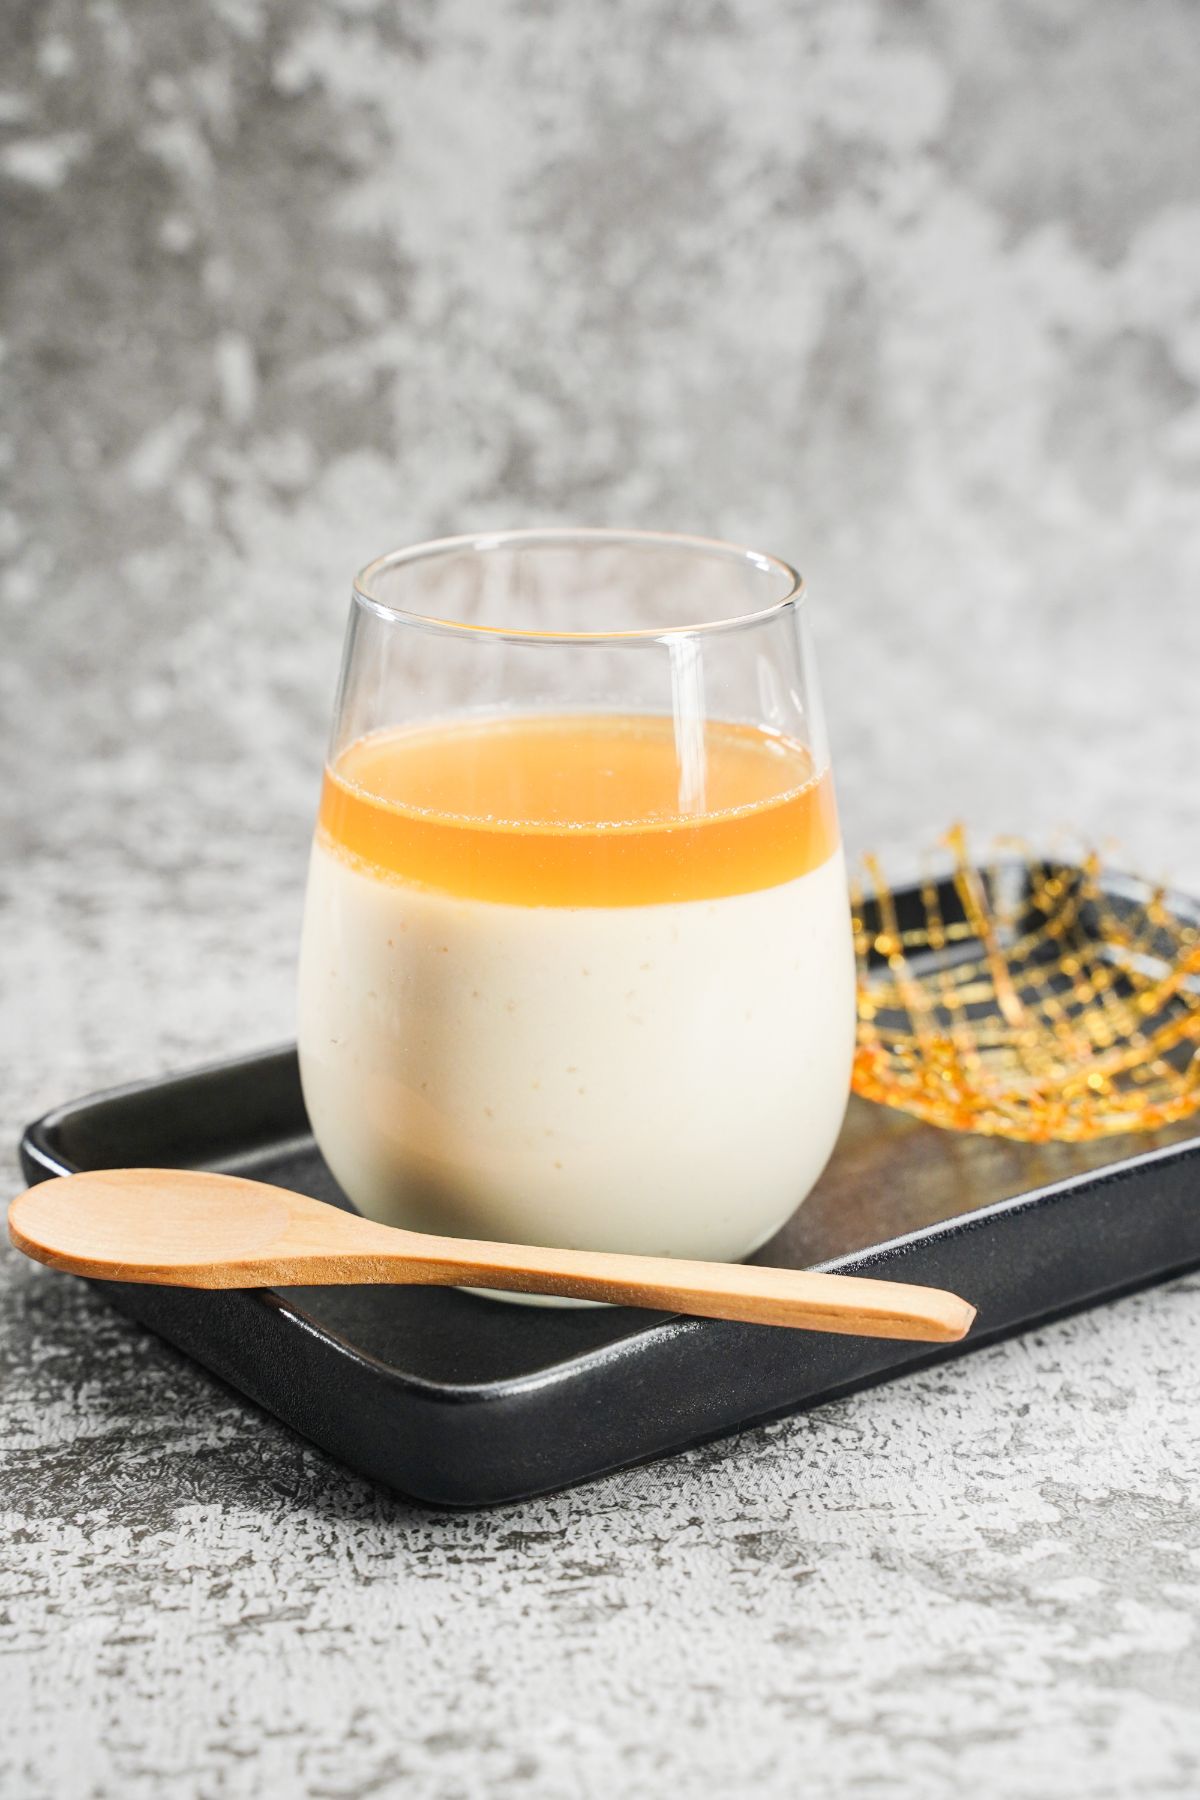 Honey Panna Cotta with wooden spoon